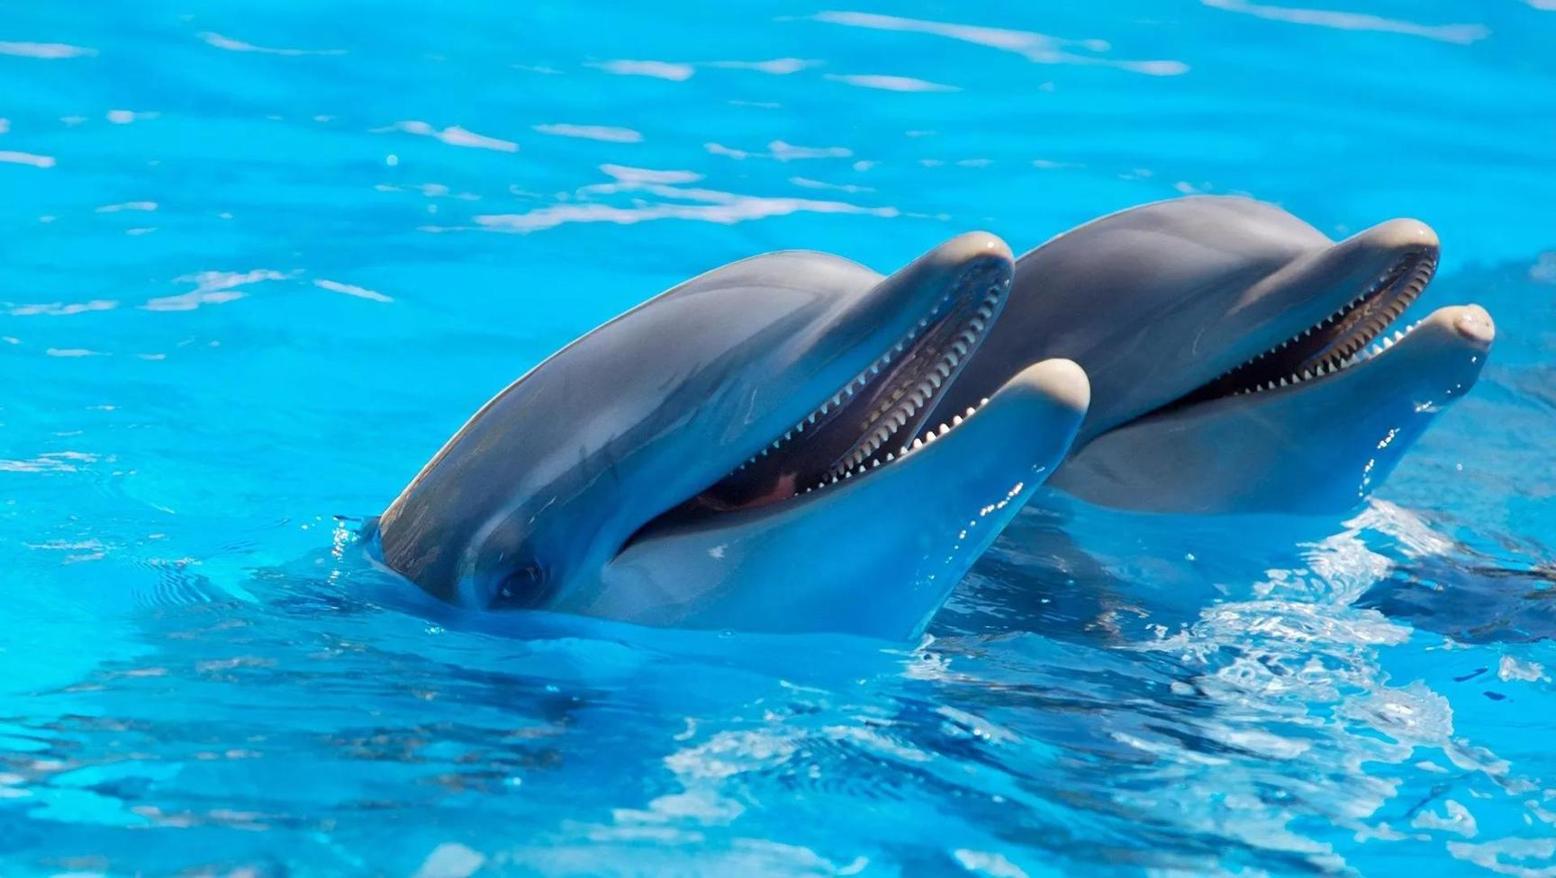 Never Before Seen Deadly Dolphin Virus Prompts Scientists to Warn of 'Mass Deaths'